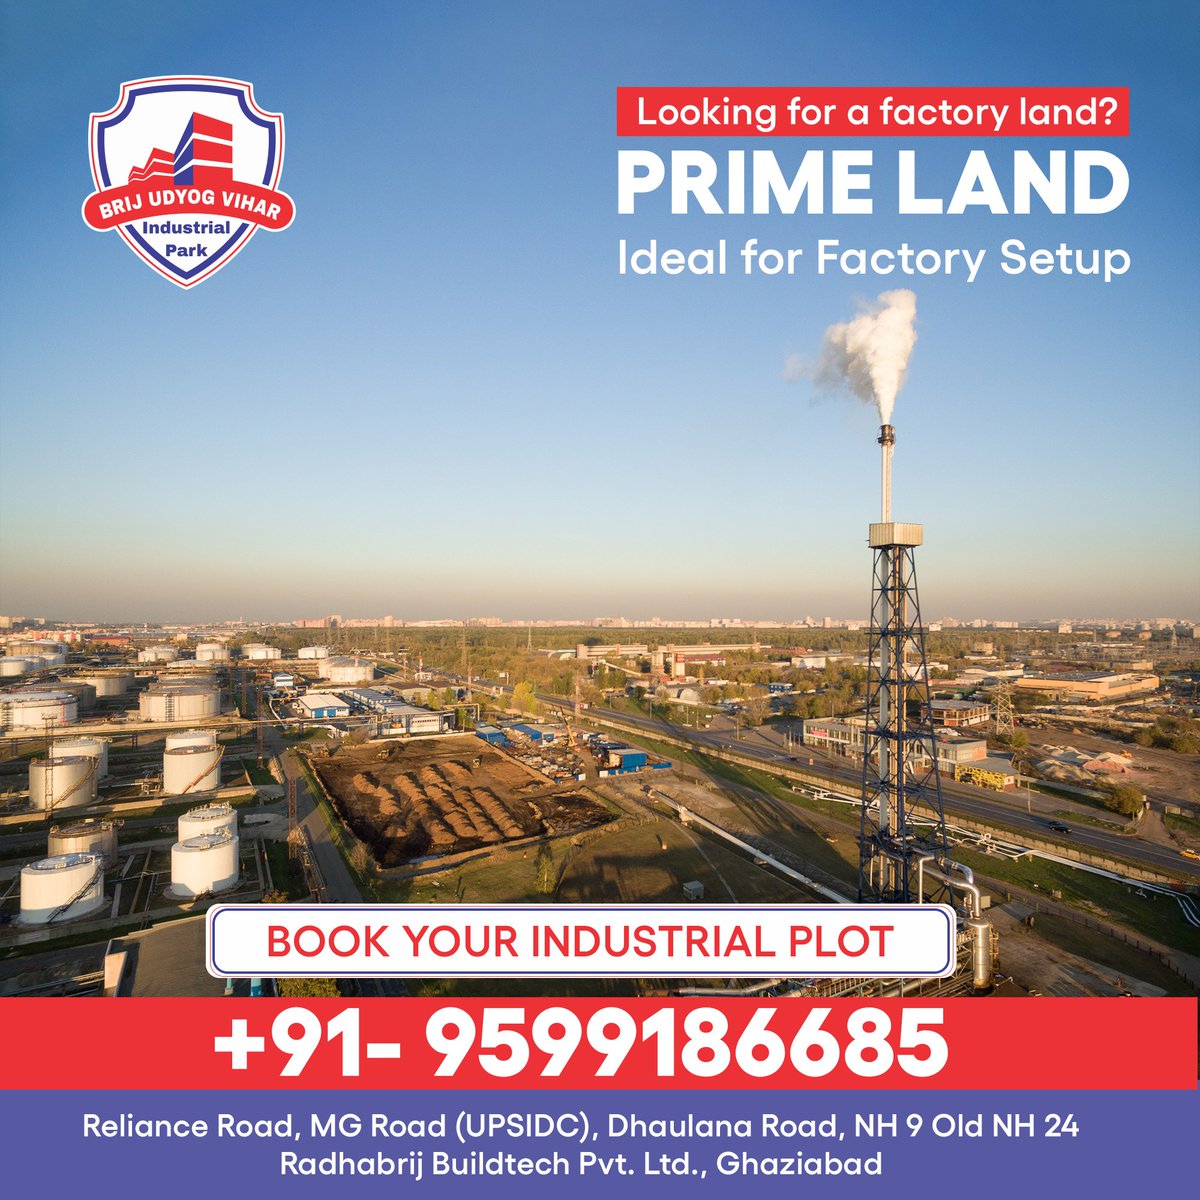 Searching for the perfect spot to kickstart your factory dreams?

Look no further! Prime industrial plots available at Brij Udyog Vihar. Your ideal factory setup awaits.

Secure your space now!!

Contact us Today:

📞 9599186685

#brijudyogvihar #industrialpark #FactorySetup